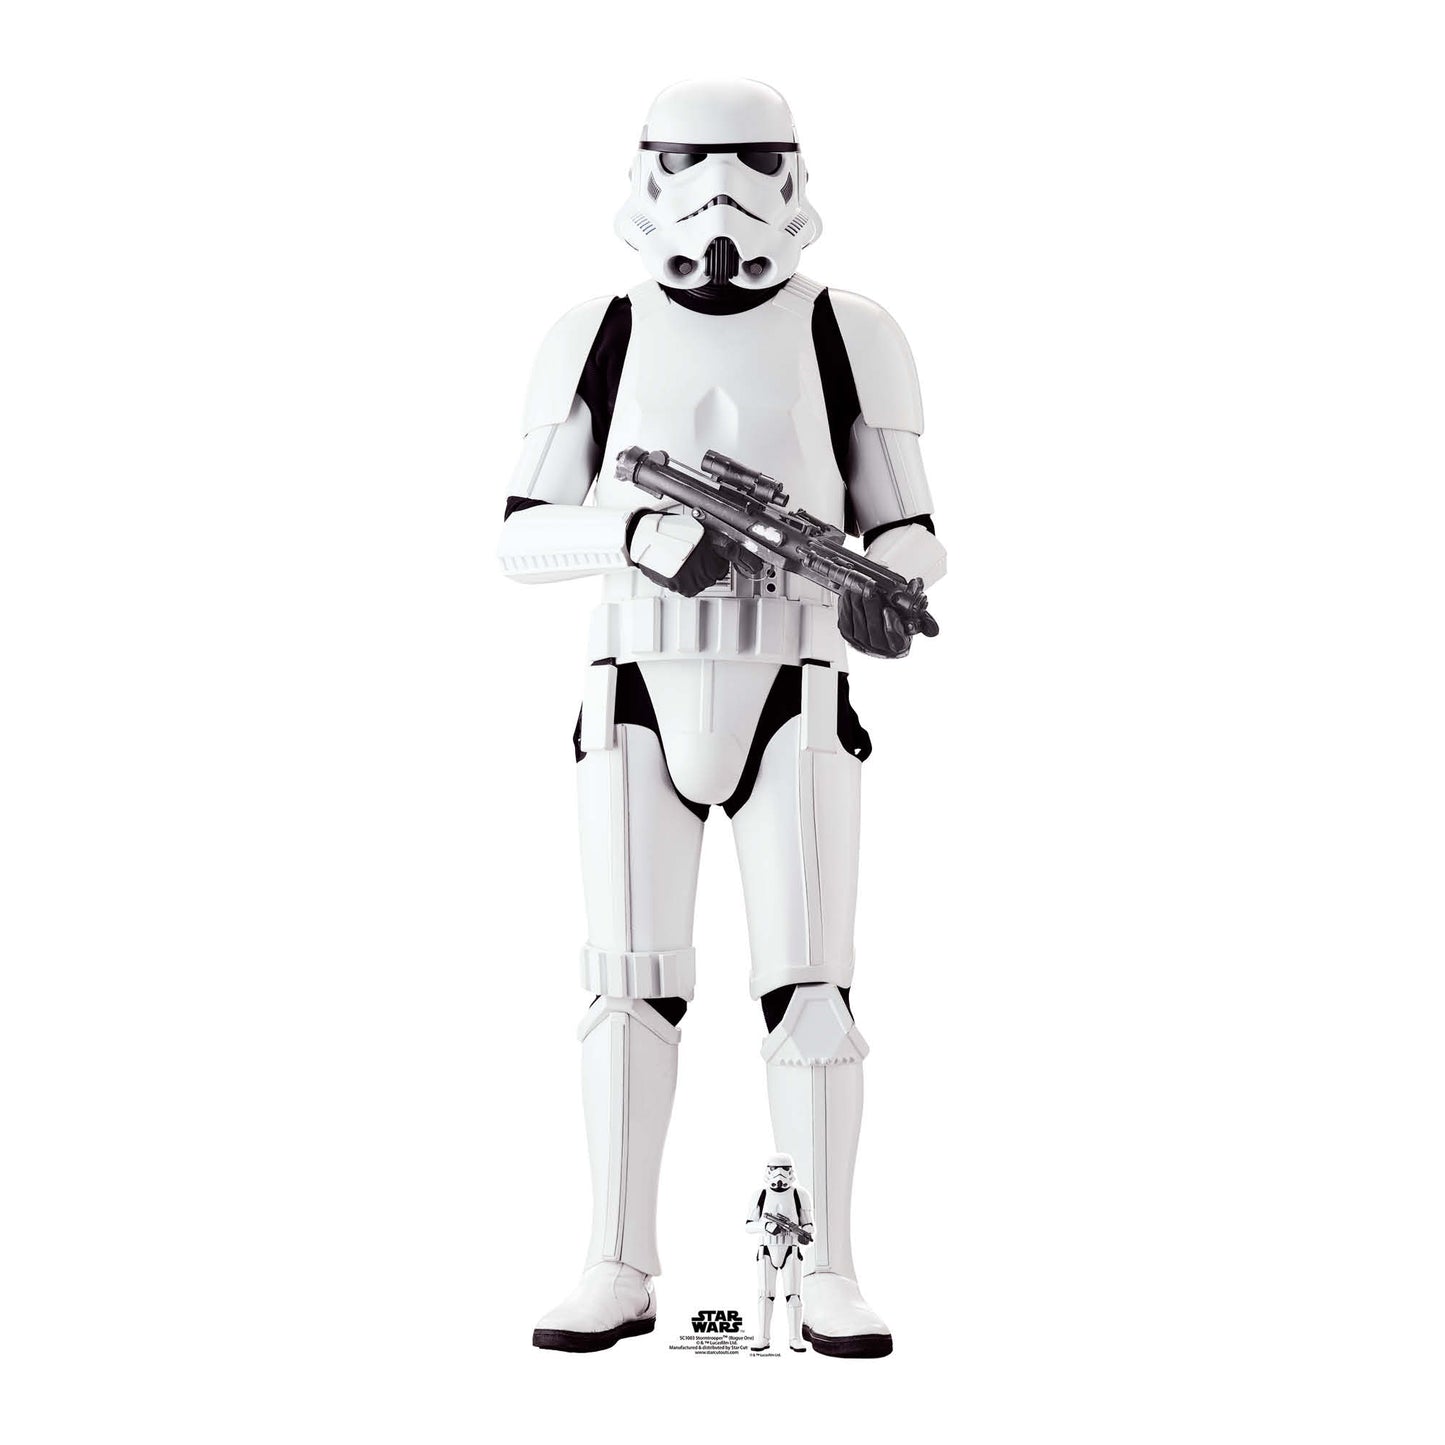 SC1003 Imperial Stormtrooper Lifesize Cardboard Cutout